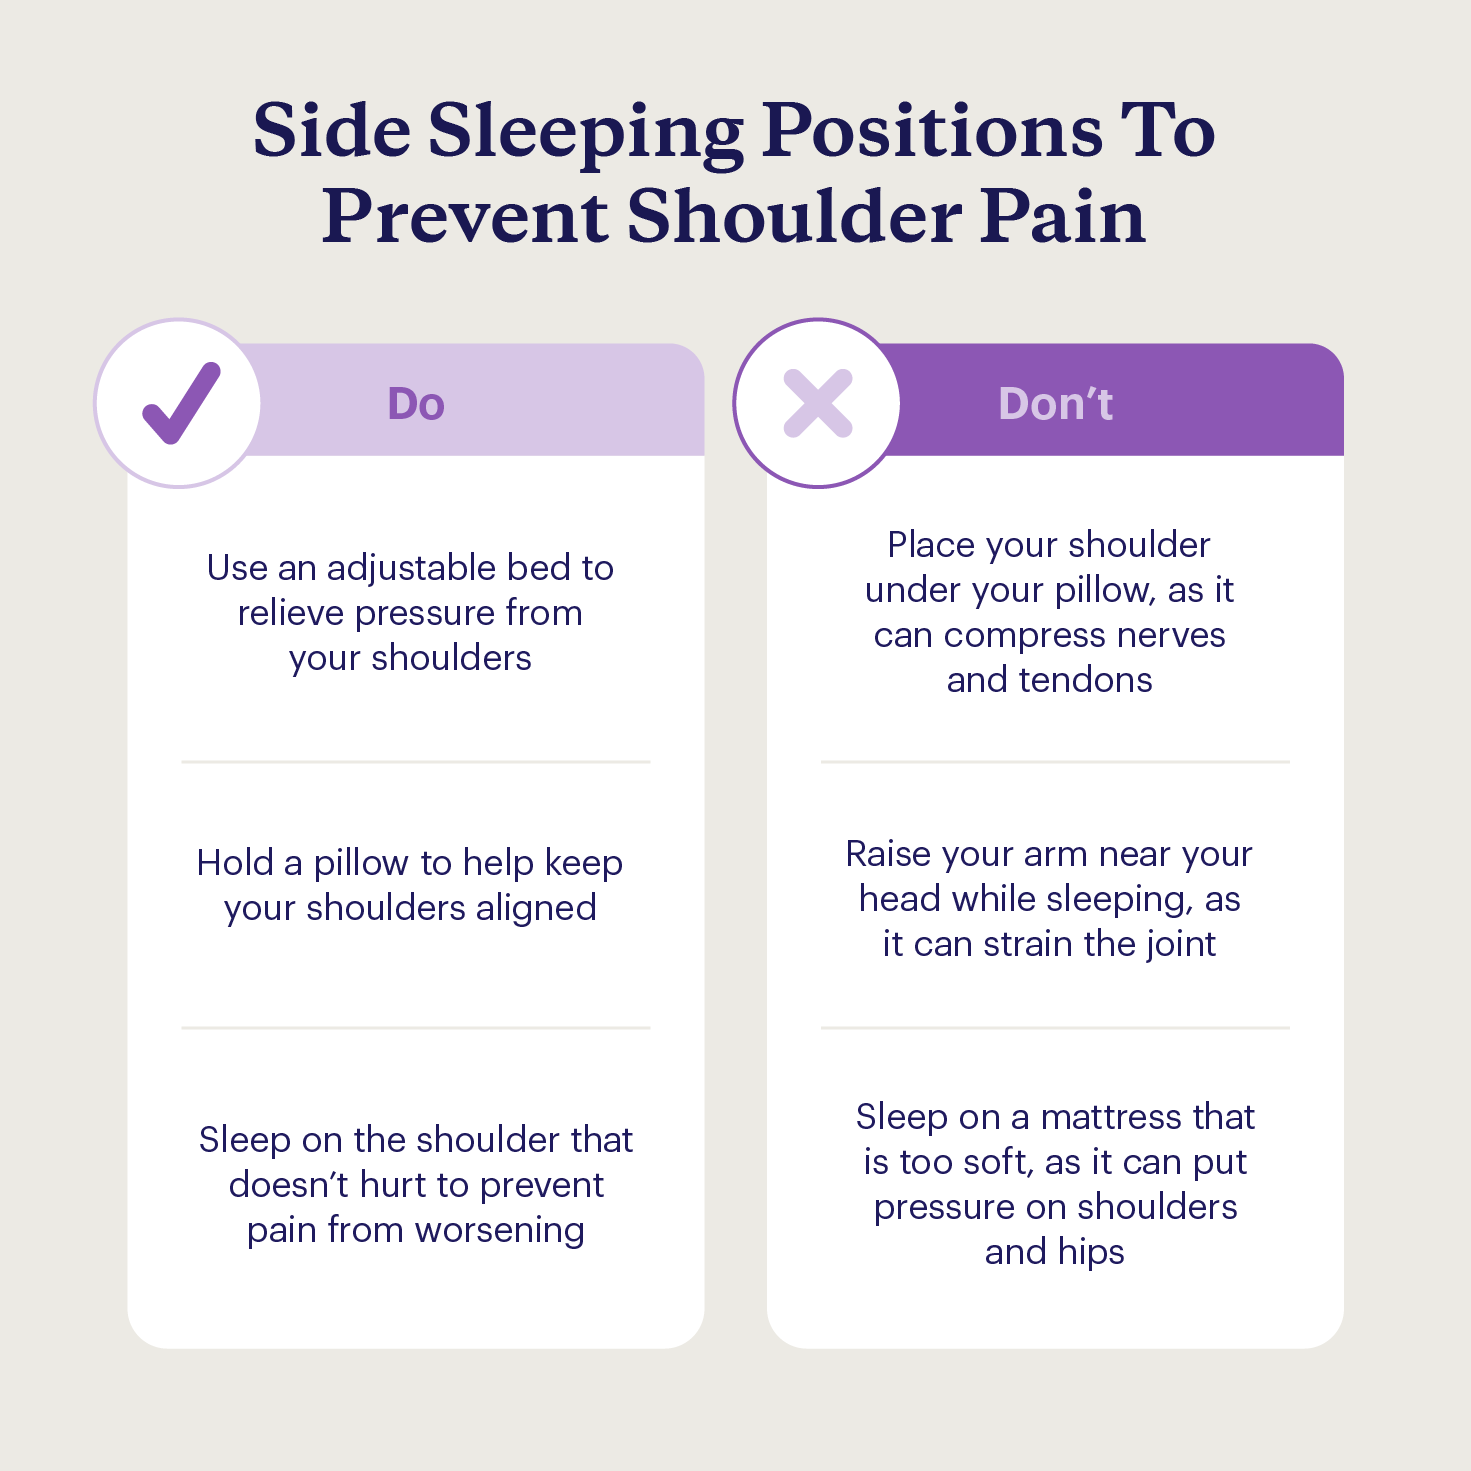 The best side sleeping positions to avoid shoulder pain and the worst side sleeping positions.